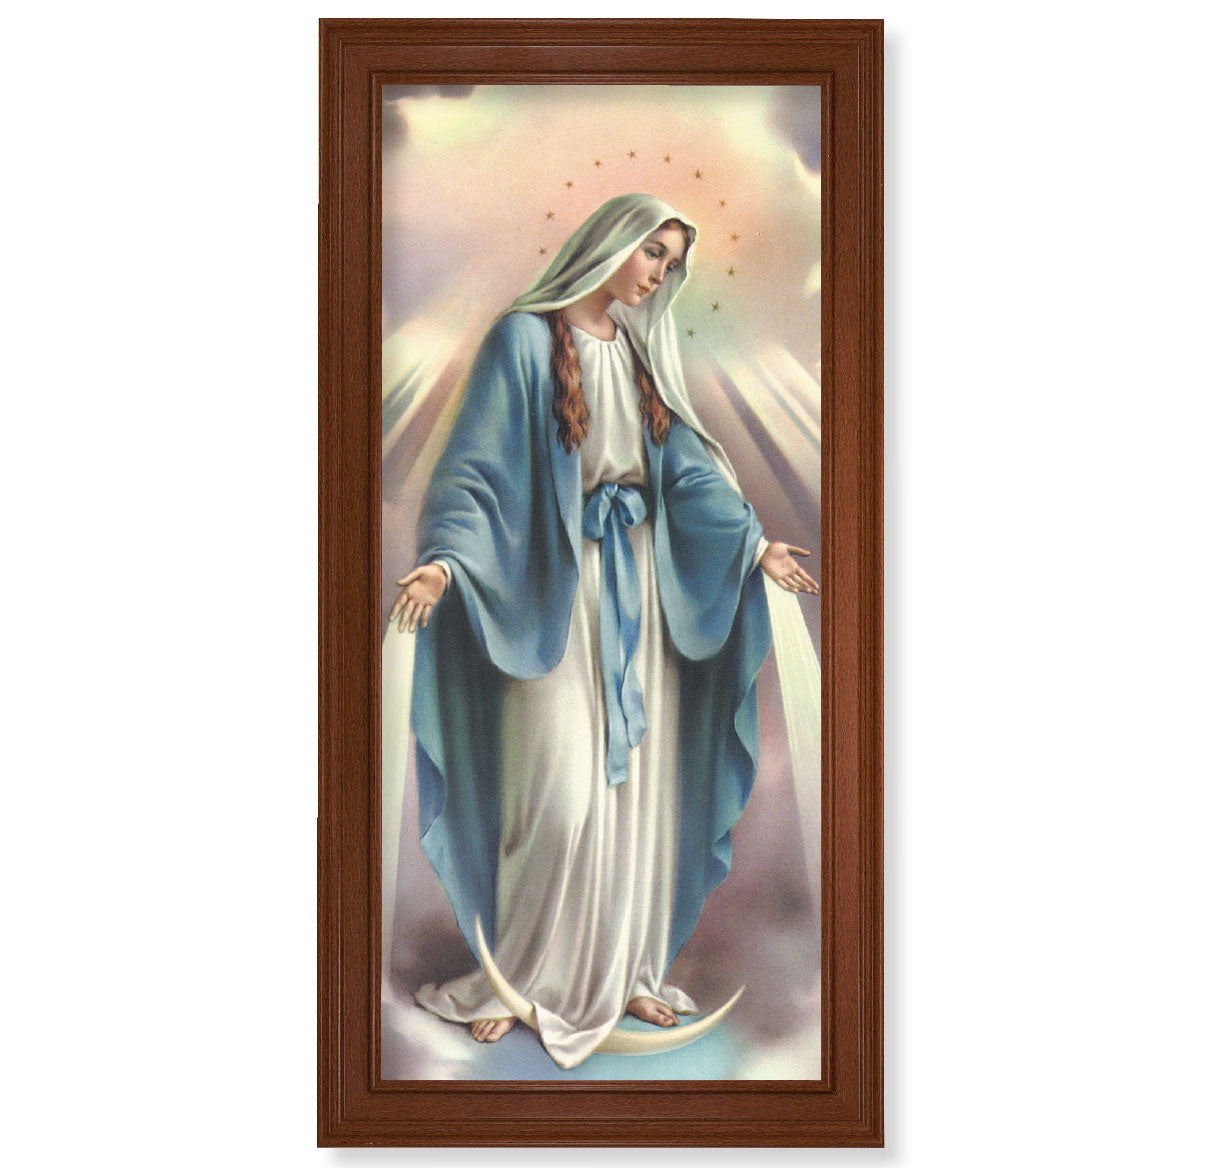 Our Lady of Grace Picture Framed Wall Art Decor Extra Large, Traditional Natural Walnut Finish Fluted Frame